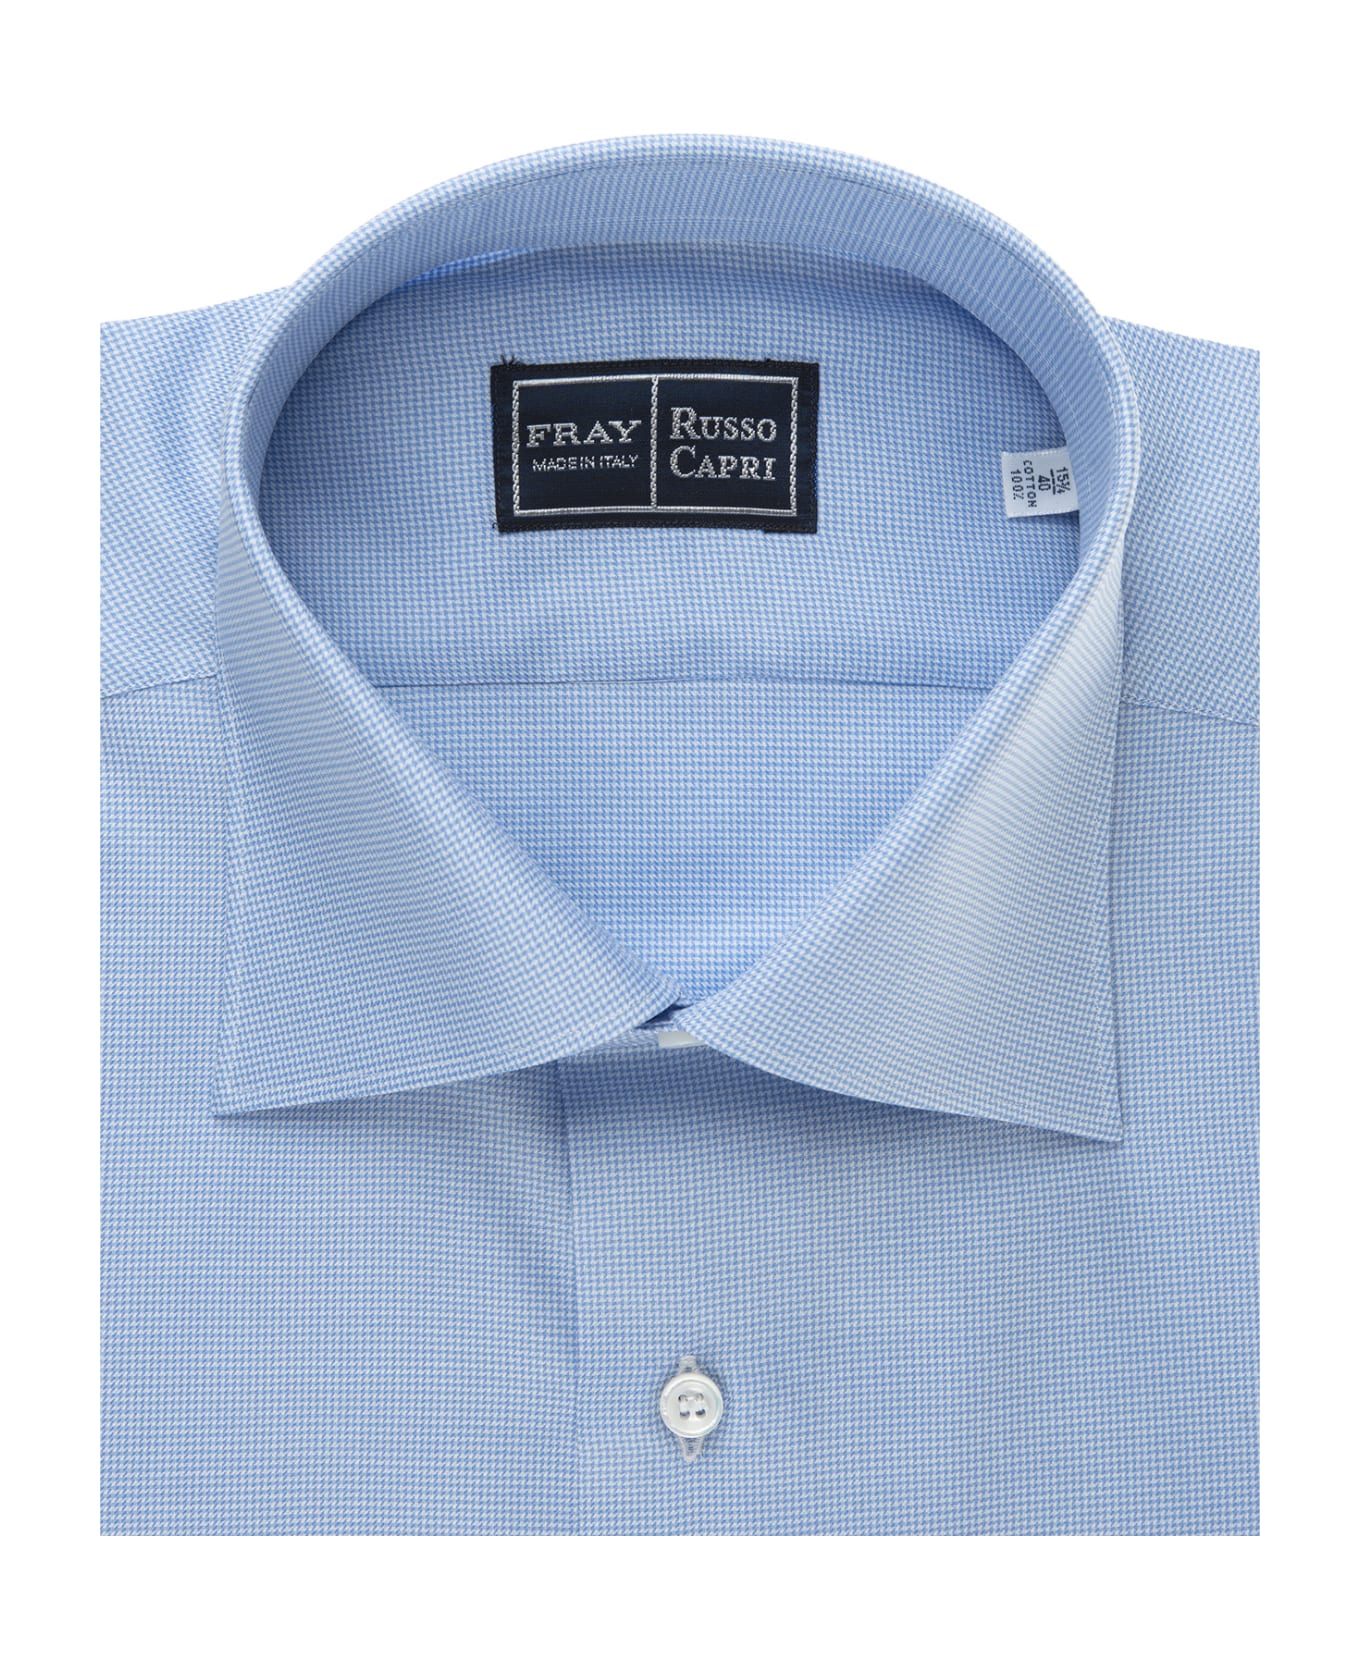 Fray Regular Fit Shirt In White And Light Blue Oxford Cotton - Blue シャツ